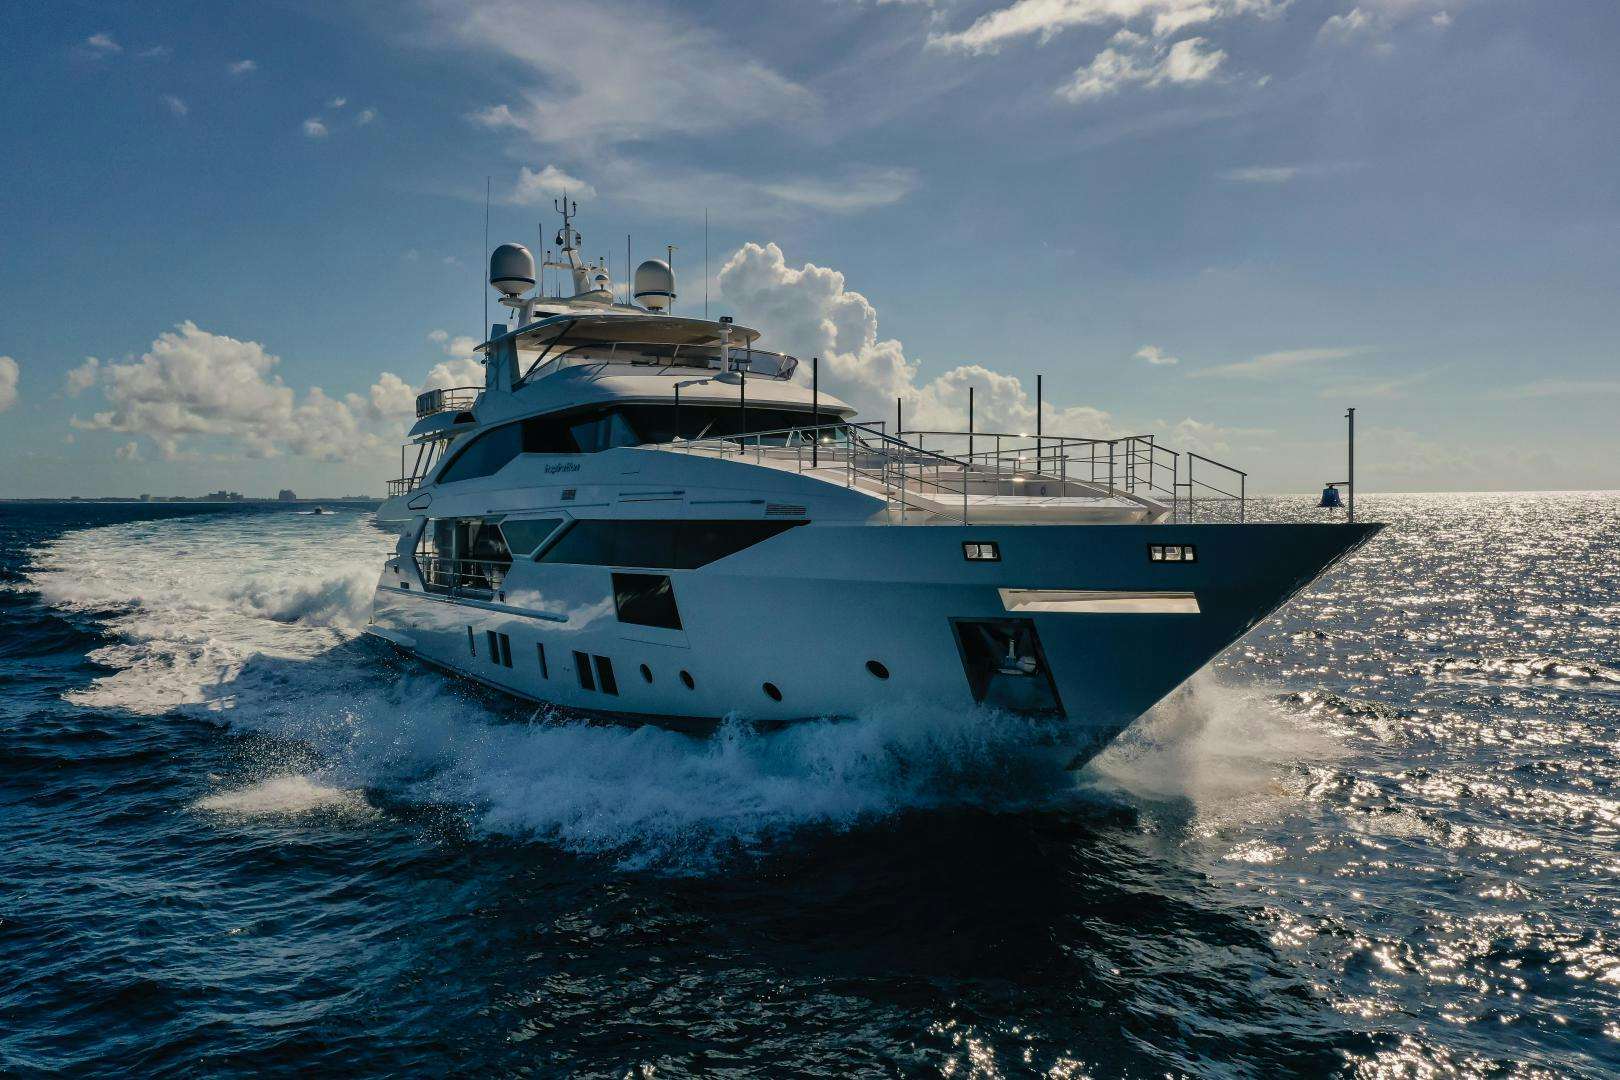 Inspiration
Yacht for Sale